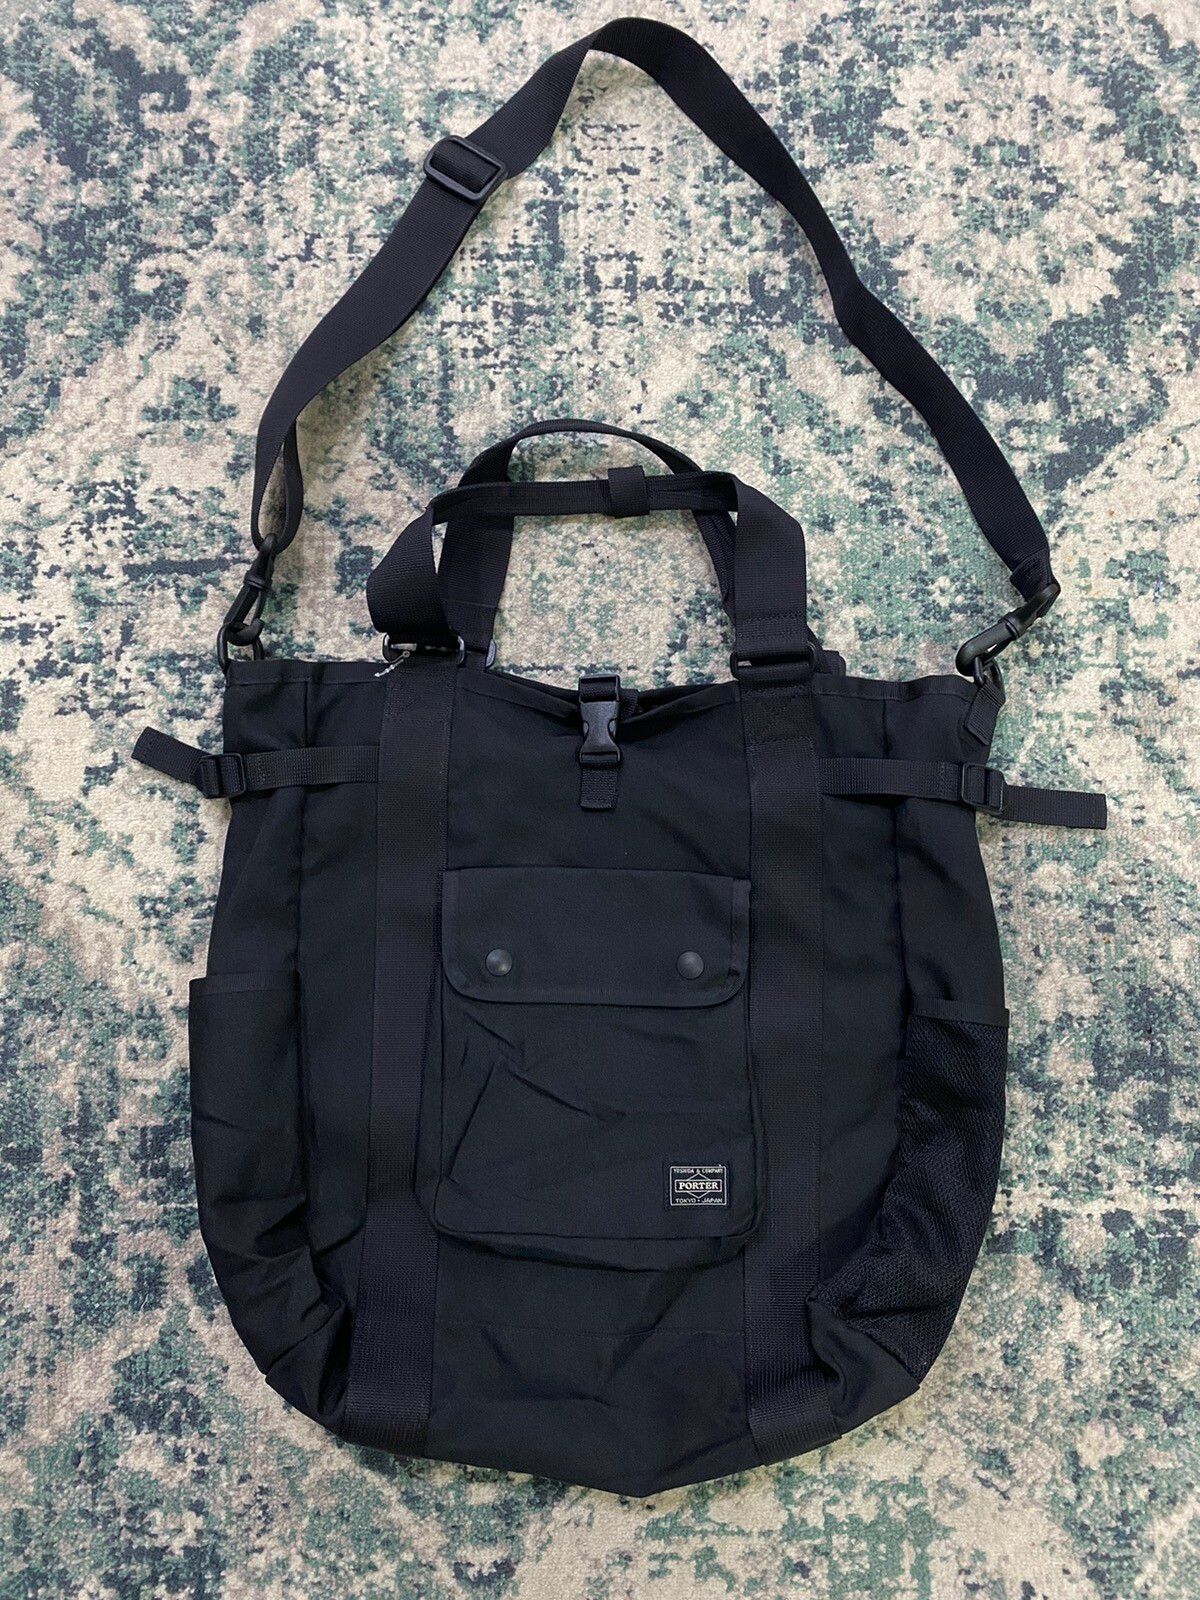 Porter Military 2 in 1 Travel/Outdoor Bag - 2